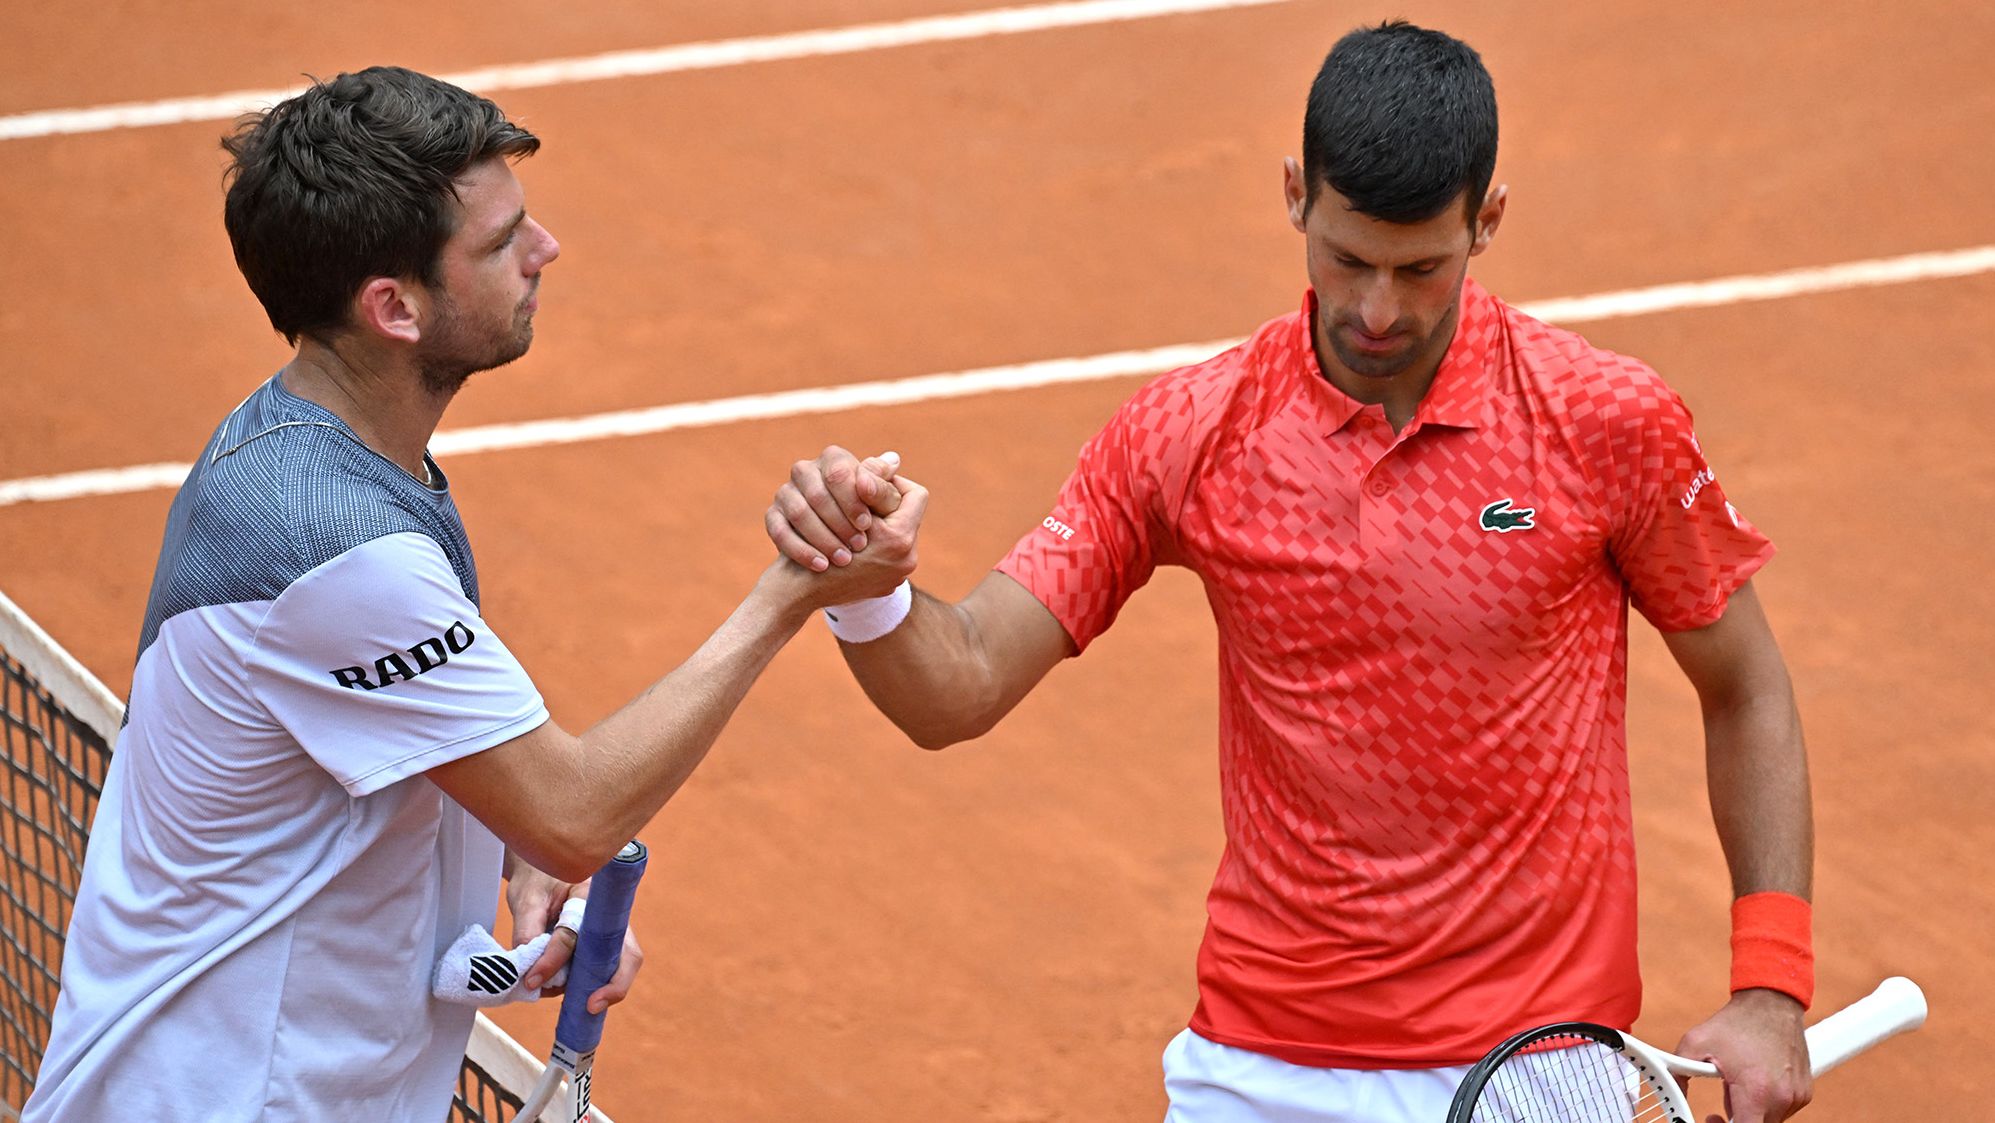 Djokovic was unhappy with Norrie throughout the match.